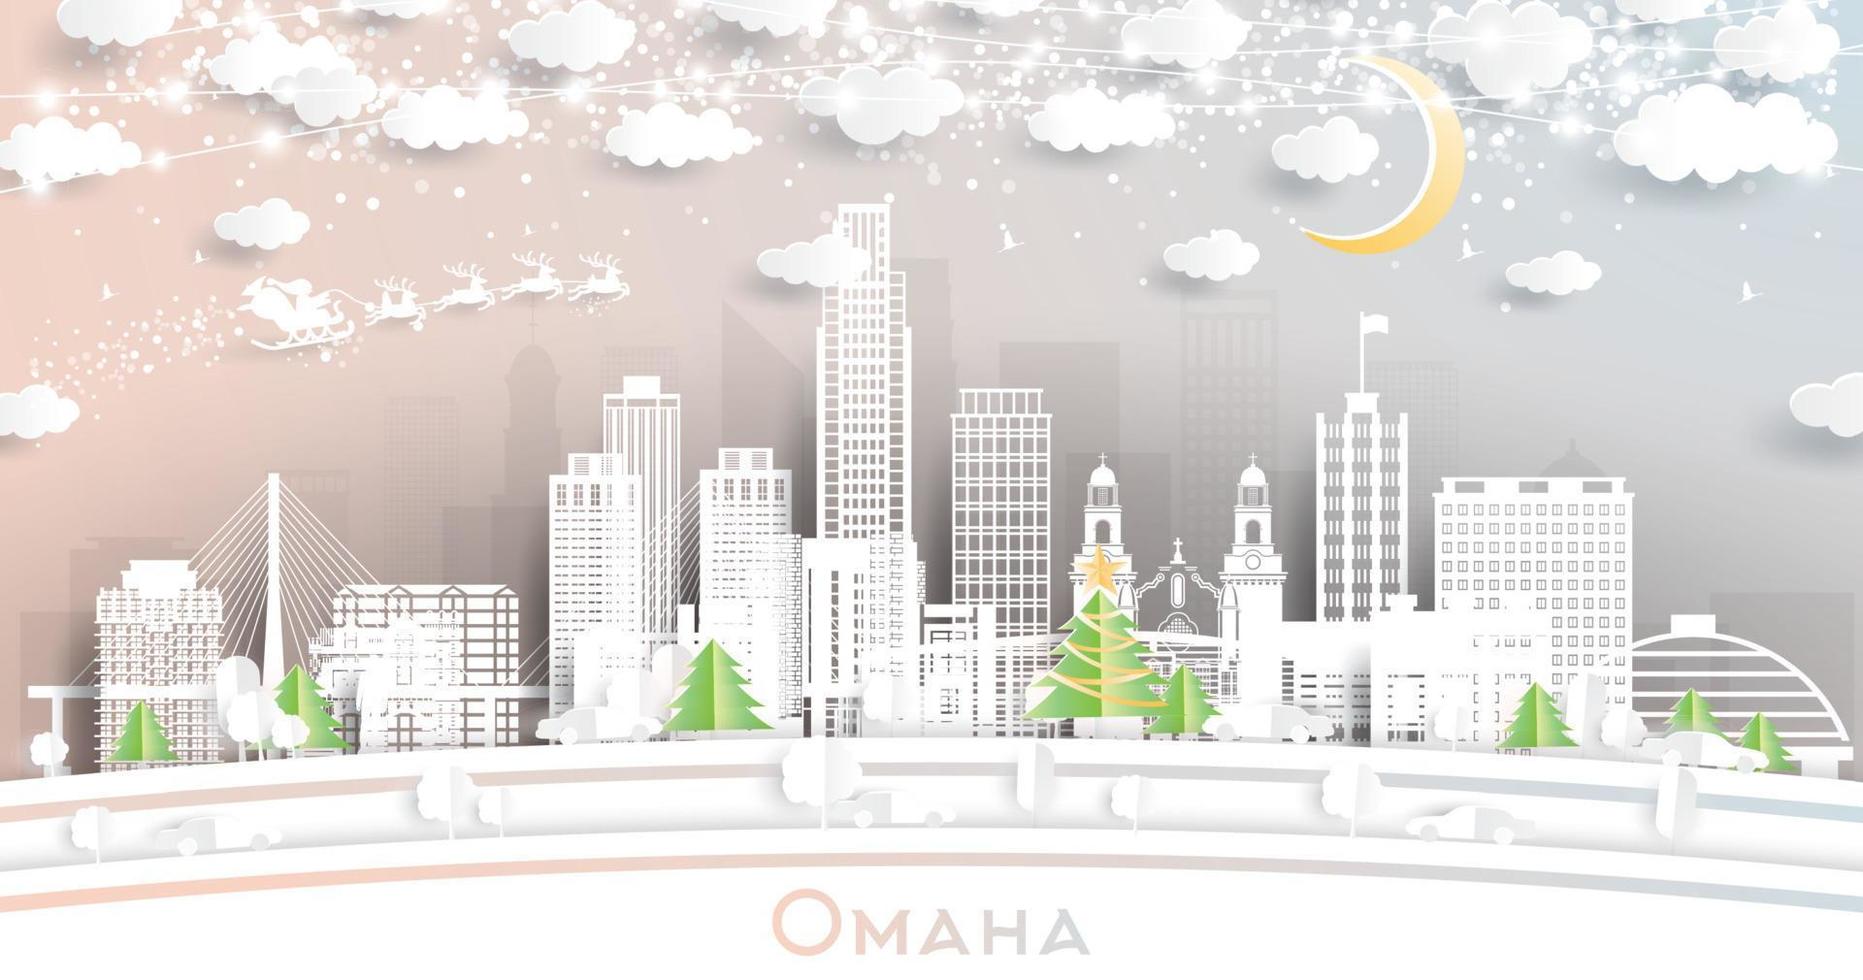 Omaha Nebraska City Skyline in Paper Cut Style with Snowflakes, Moon and Neon Garland. vector